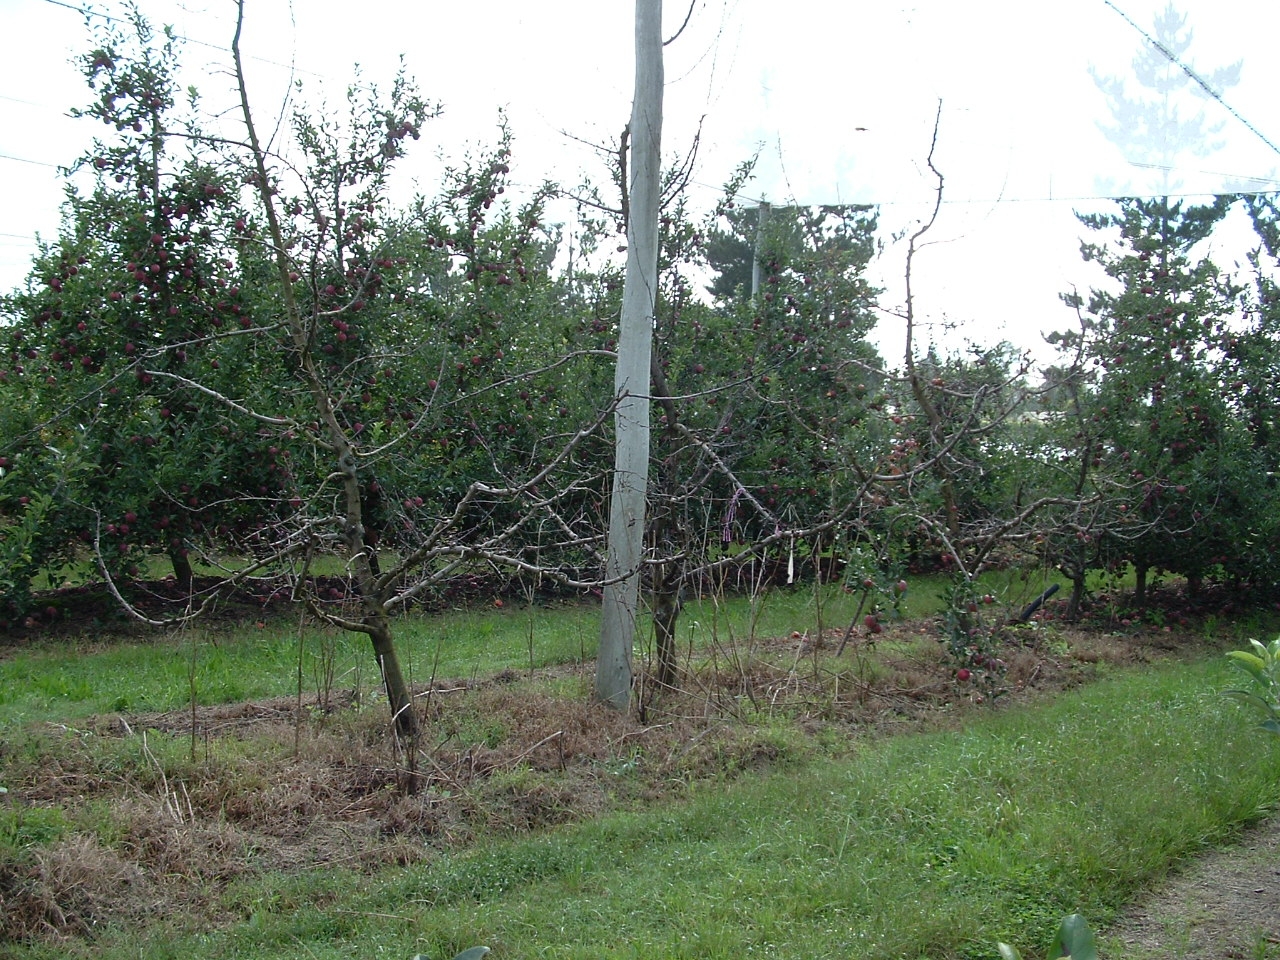 A row of dead and bare trees in an apple orchard